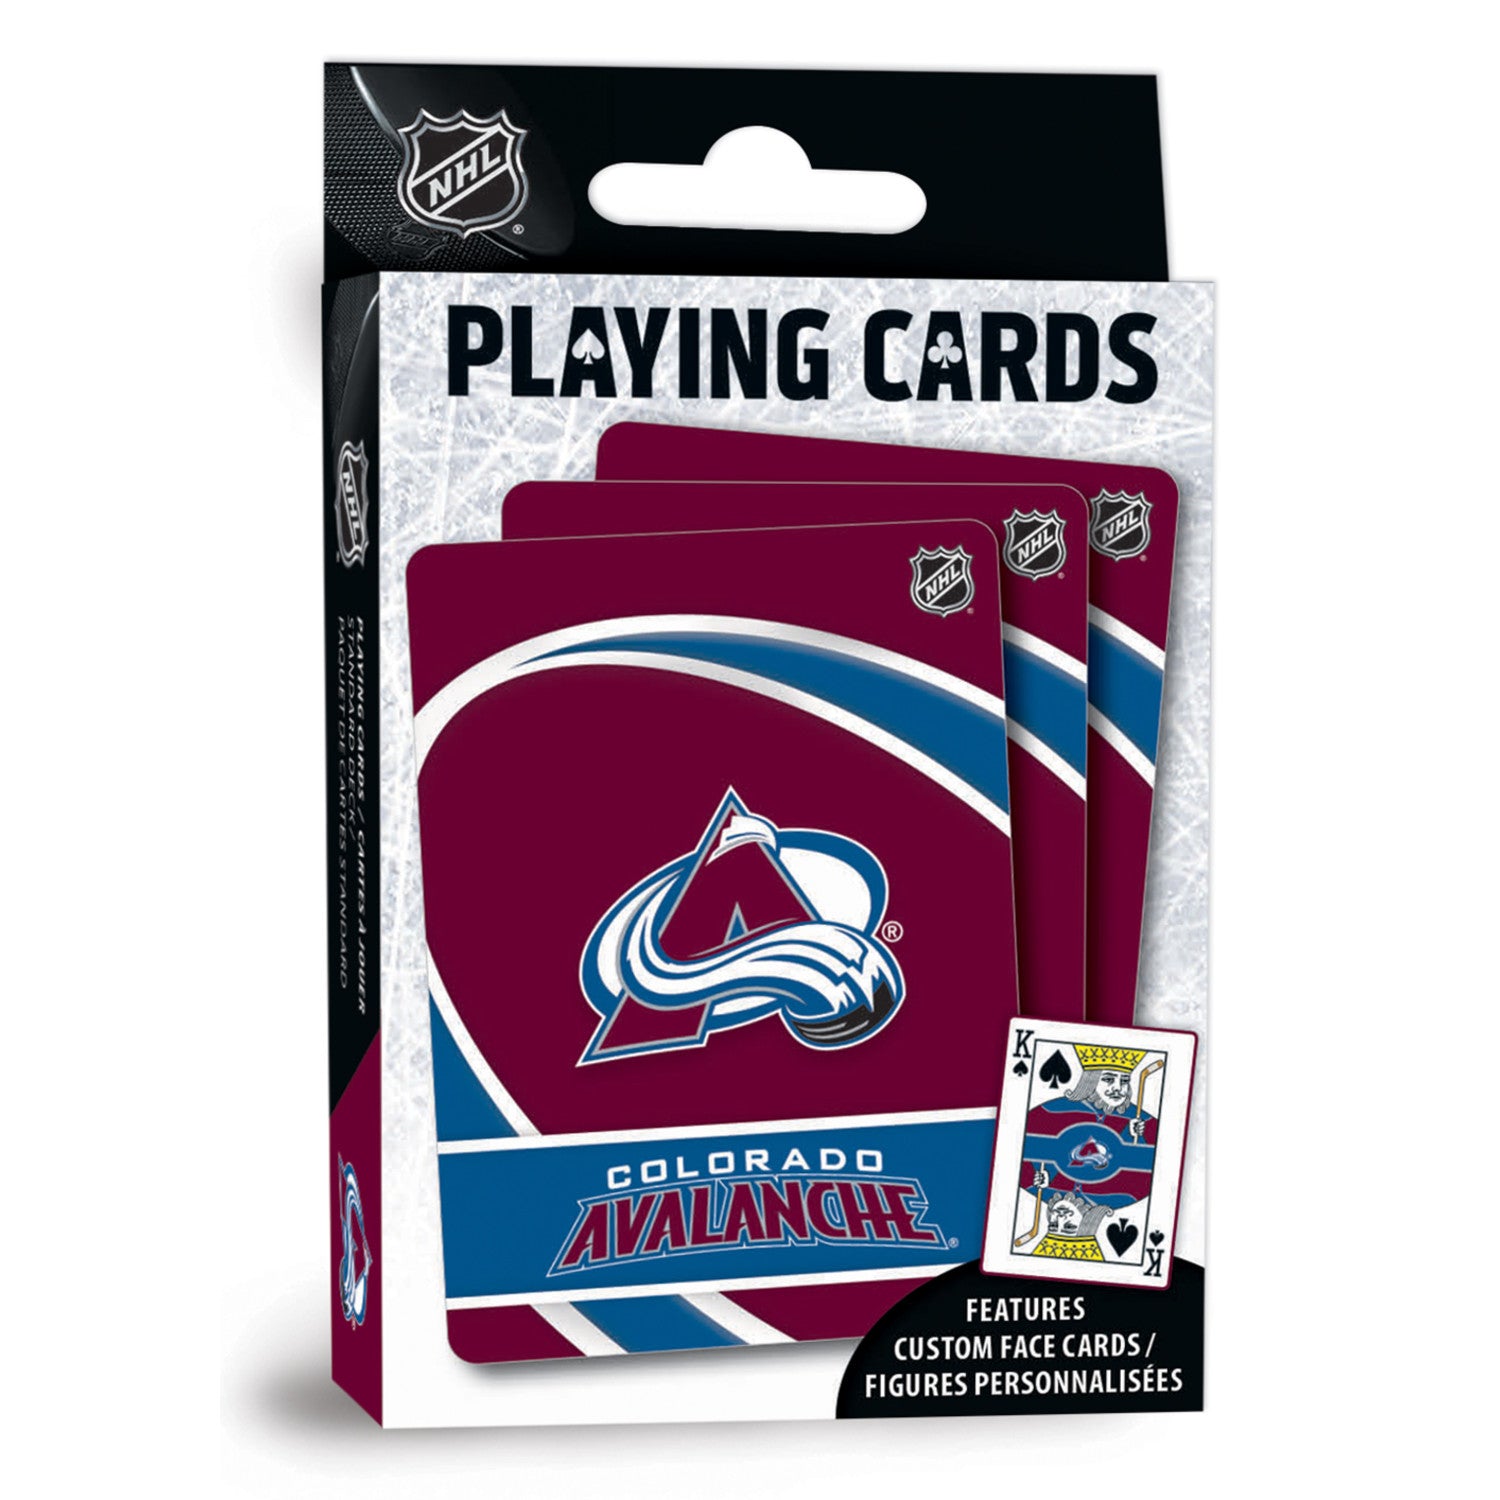 Colorado Avalanche Playing Cards - 54 Card Deck